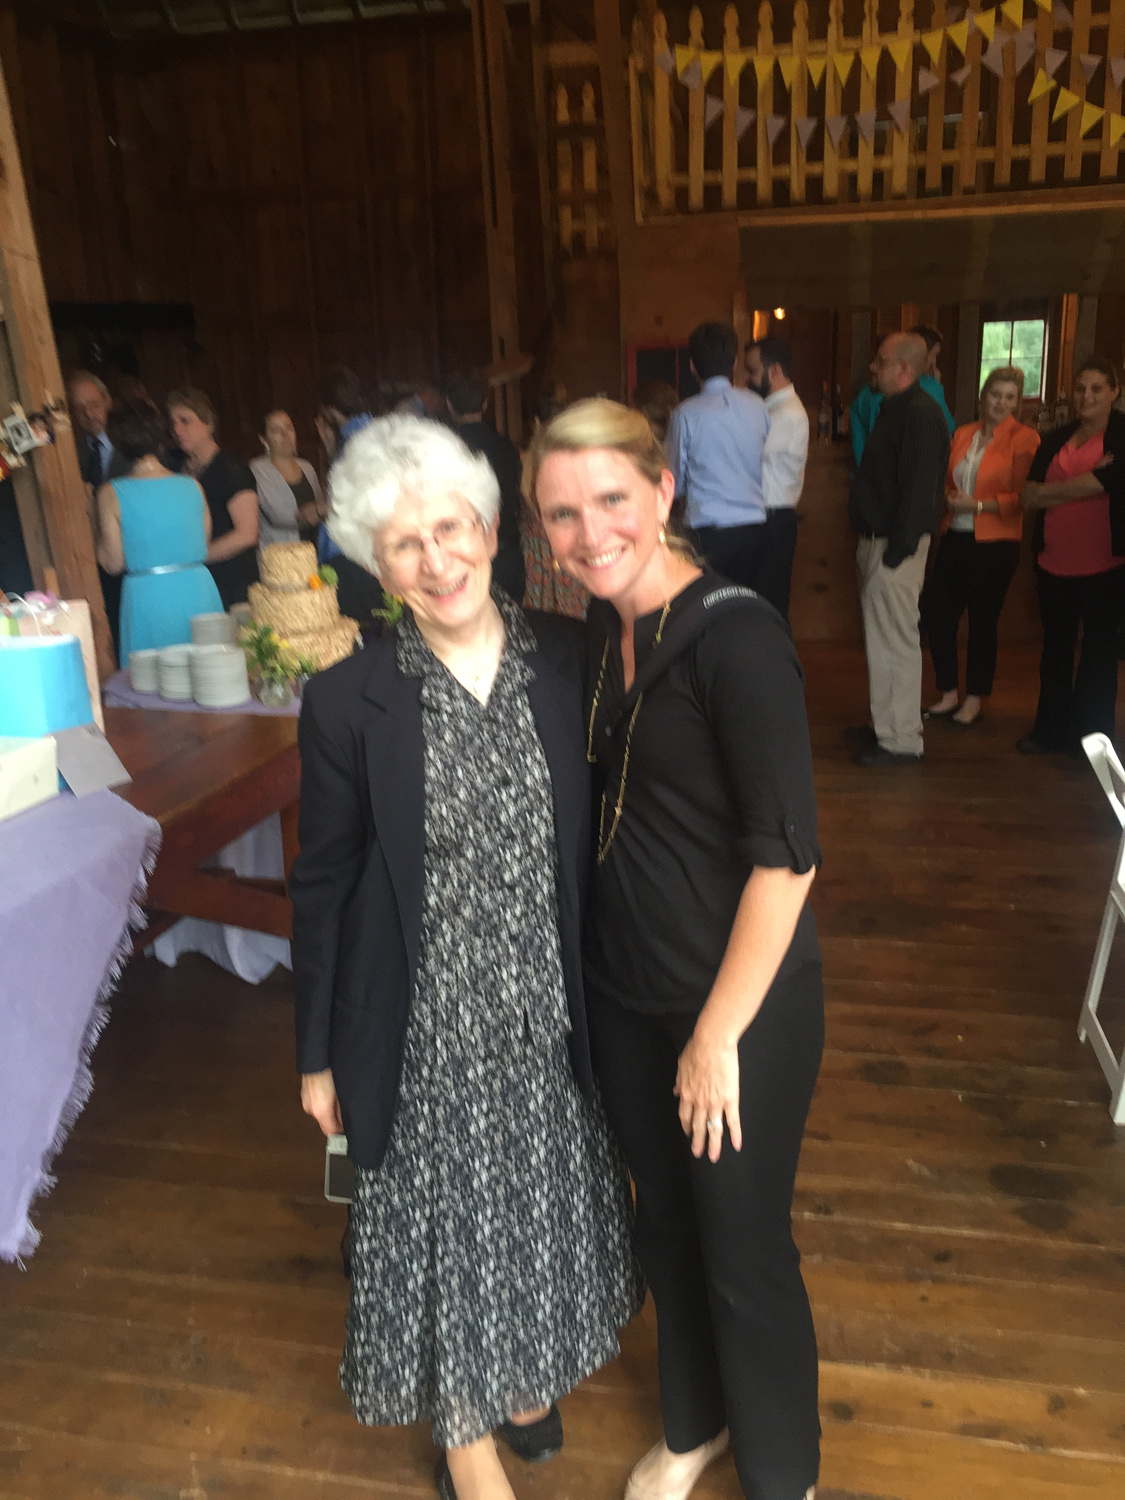  I LOVE making people connections - realizing a very special nun from South Dakota who has mutual friends is at the wedding you're shooting means a photo is needed!&nbsp; 